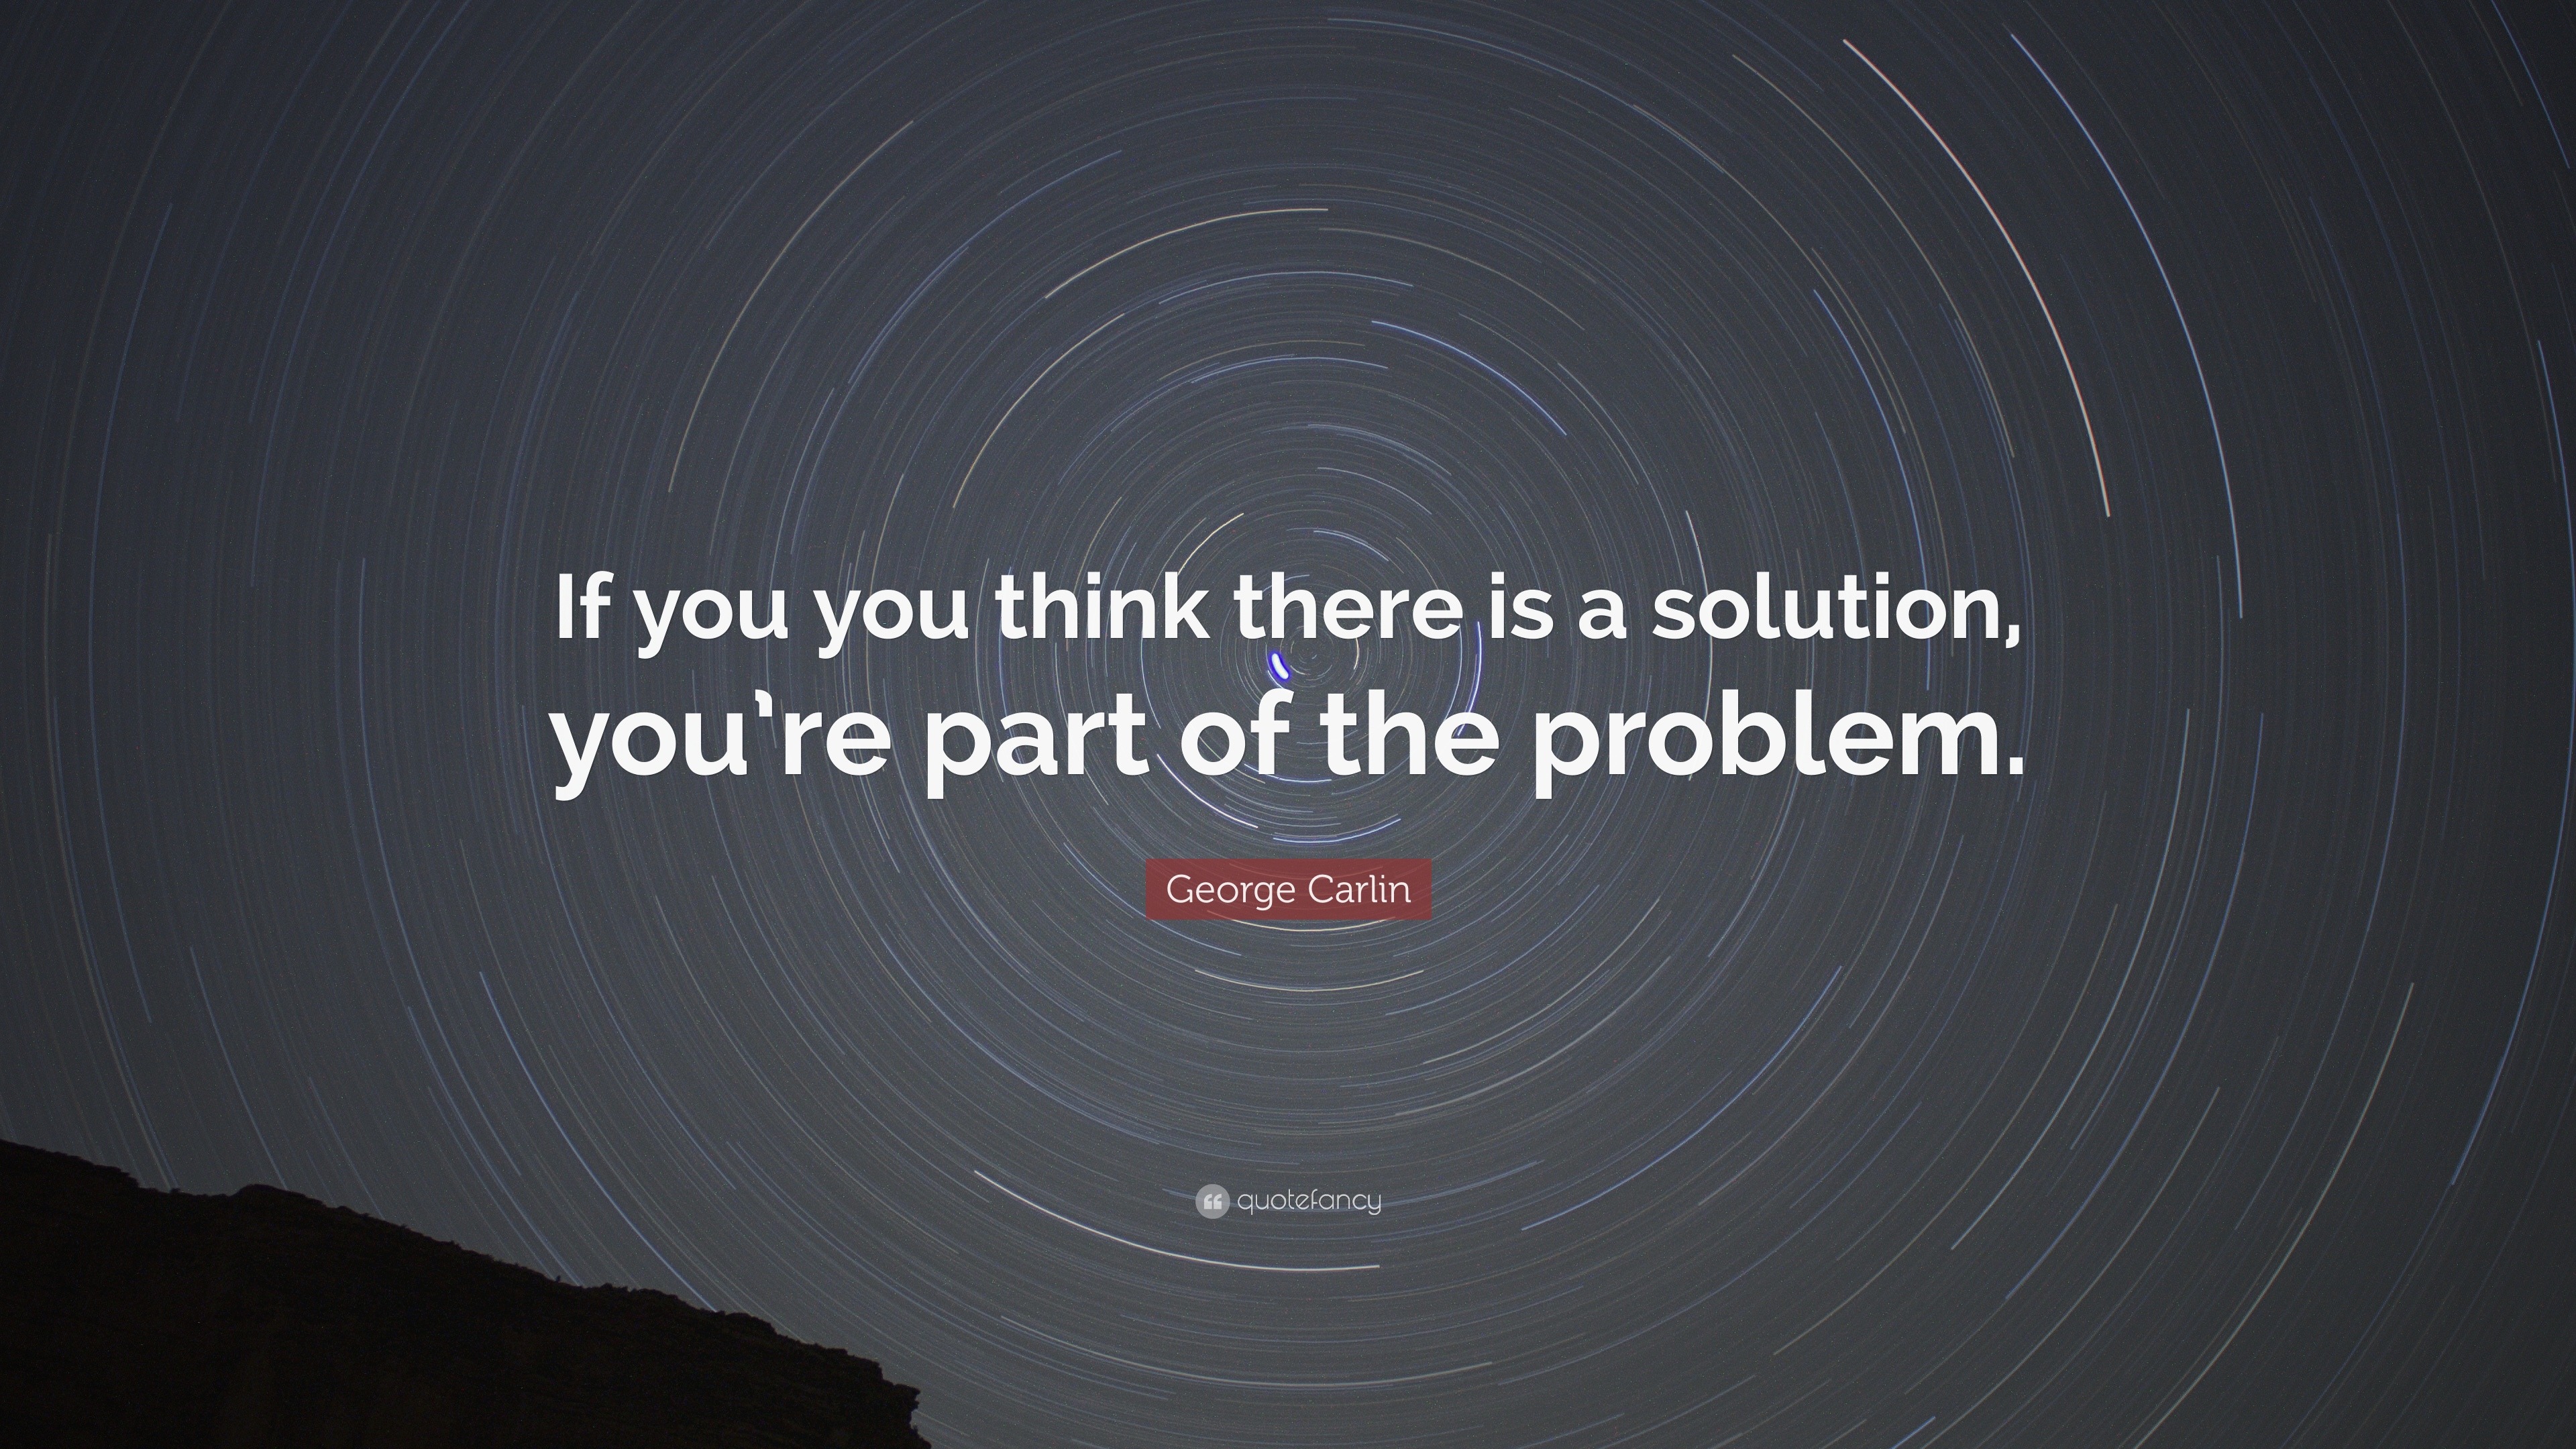 Carlin Quote “If you you think there is a solution, you’re part